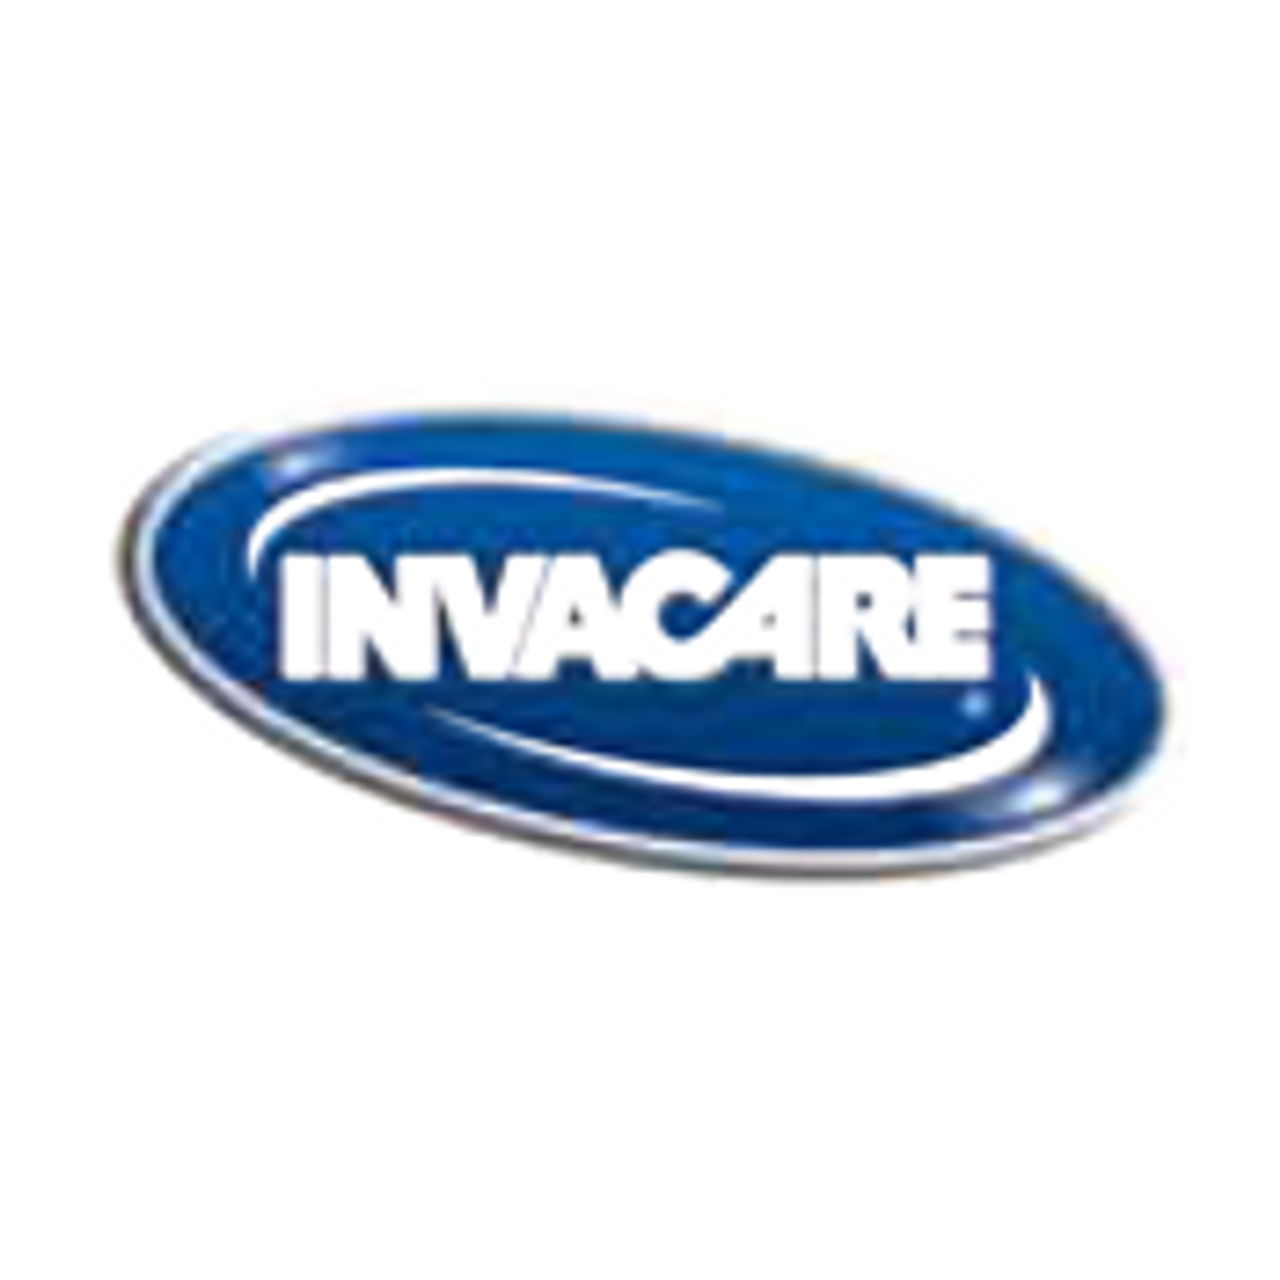 Invacare Medical Recliners